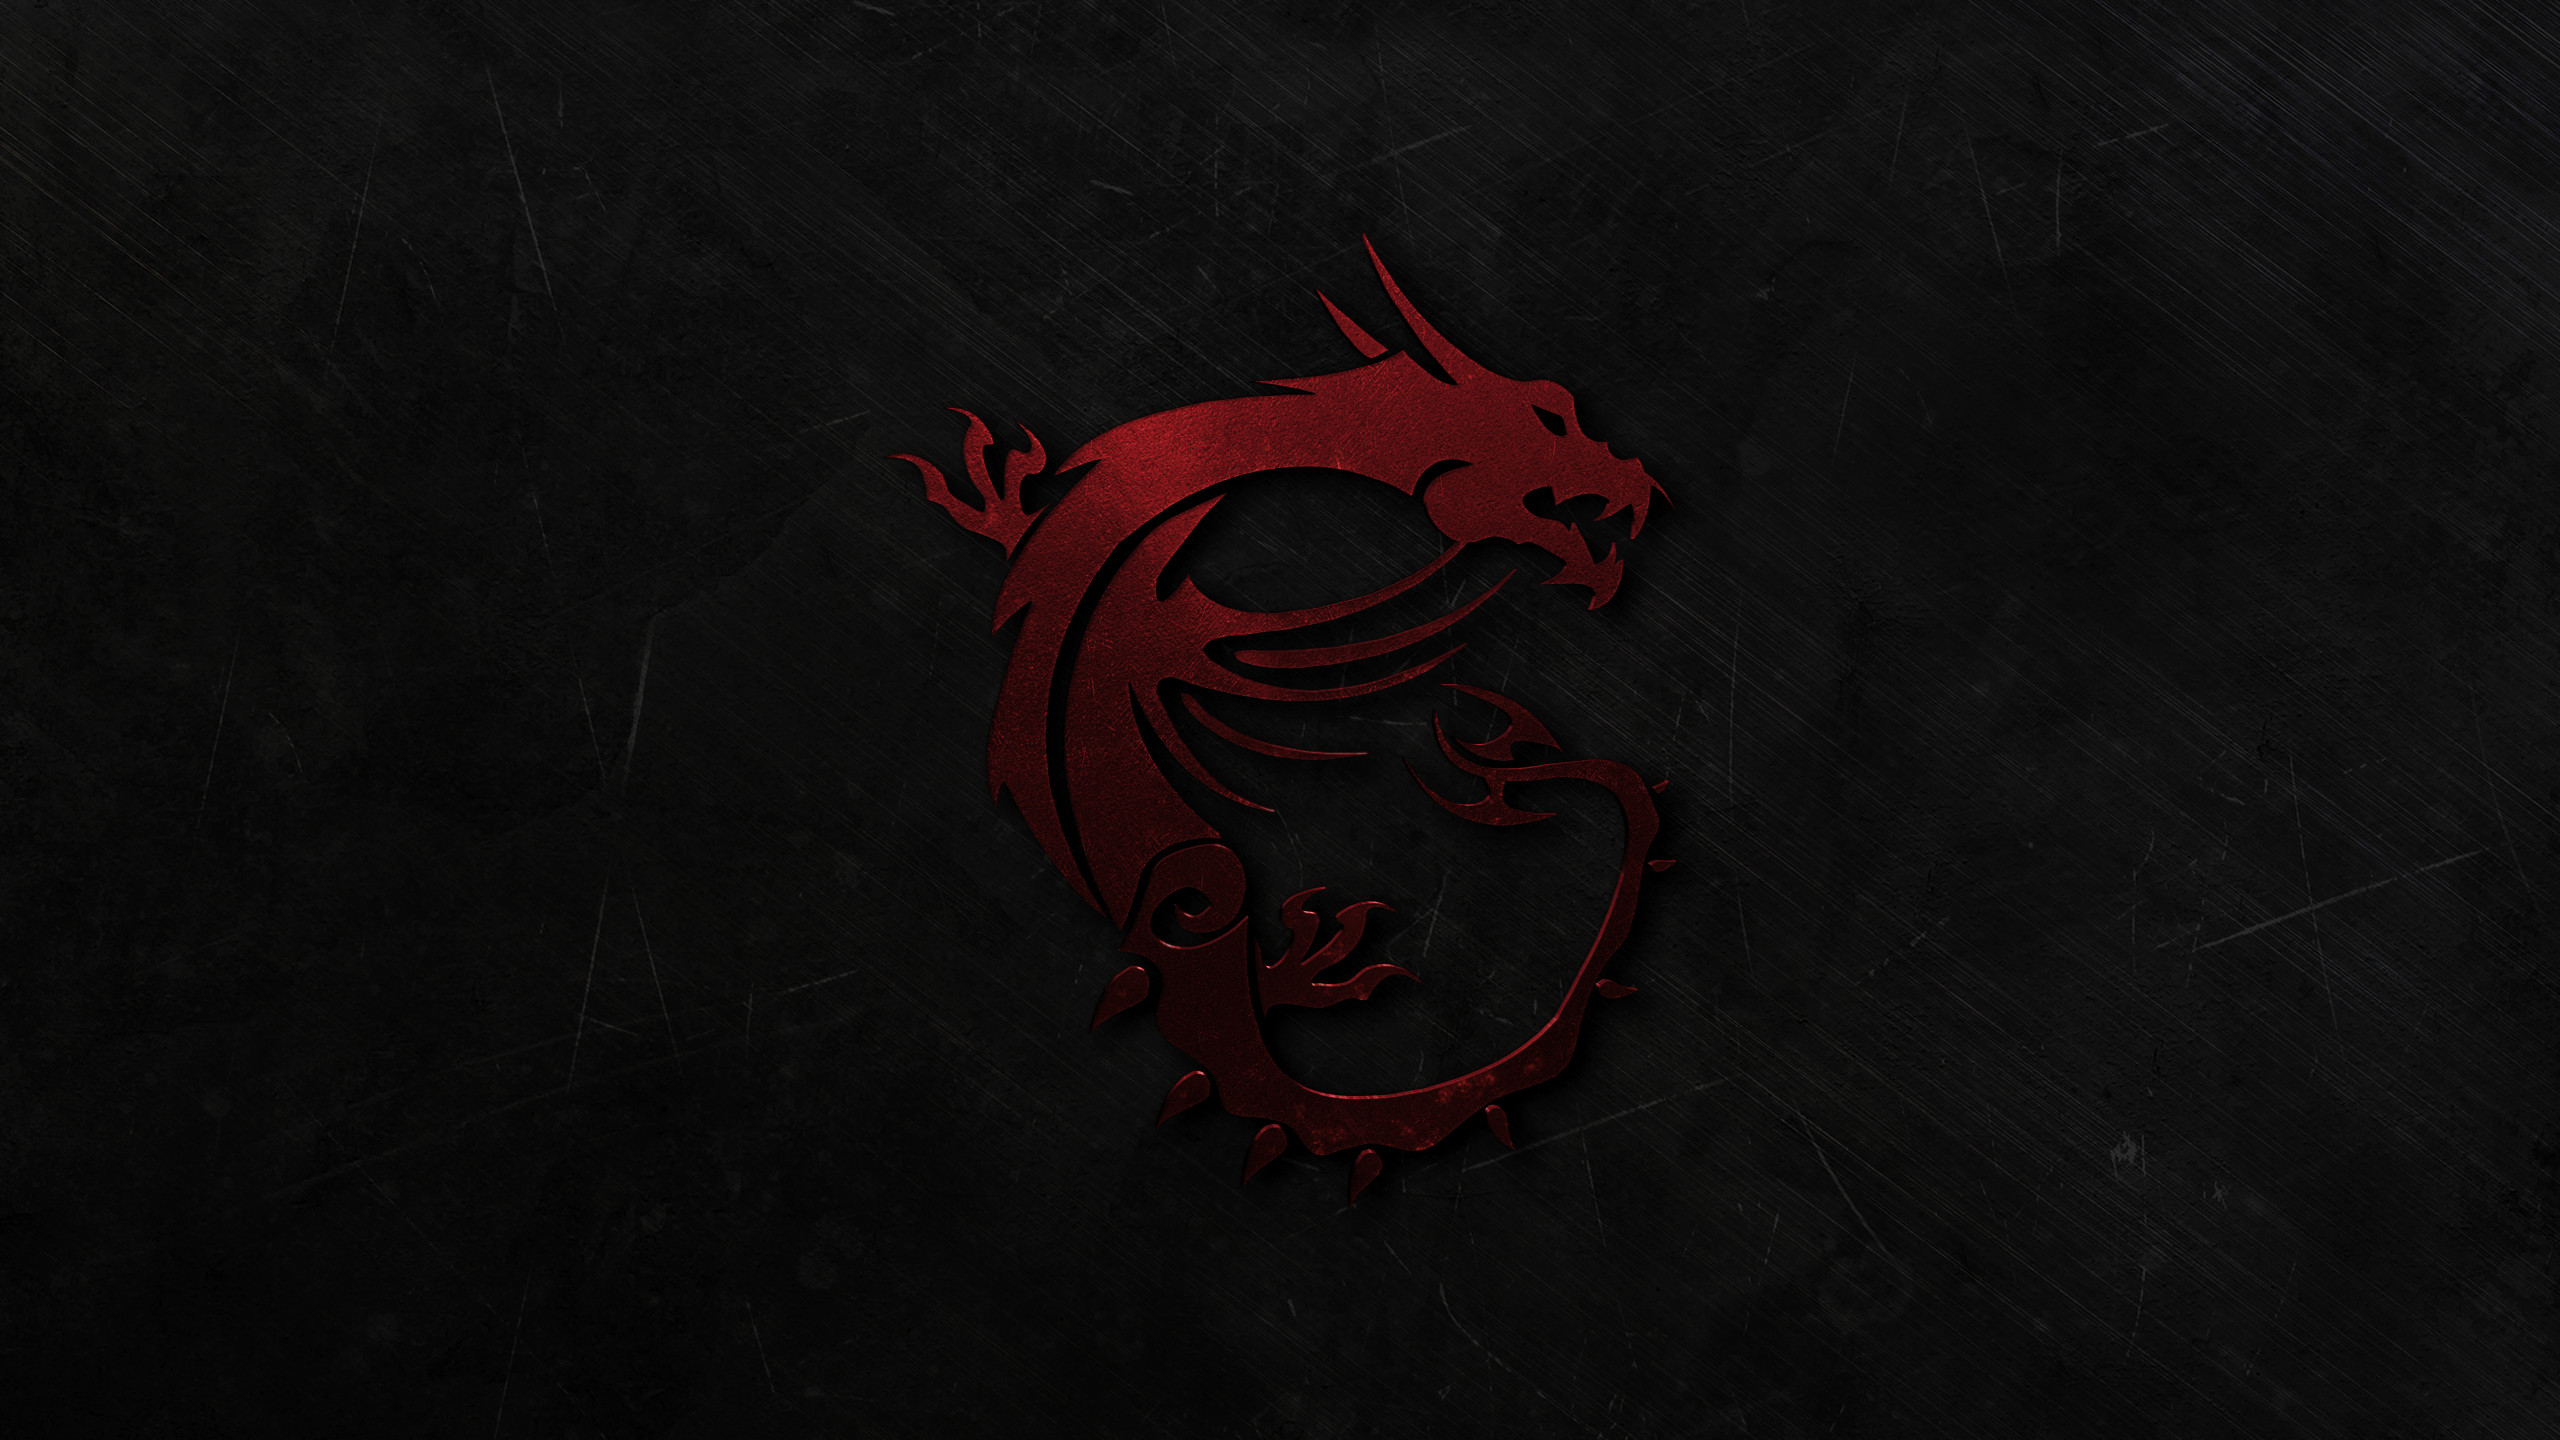 MSI Gaming Dragon Wallpaper V2 Red by Xilent21